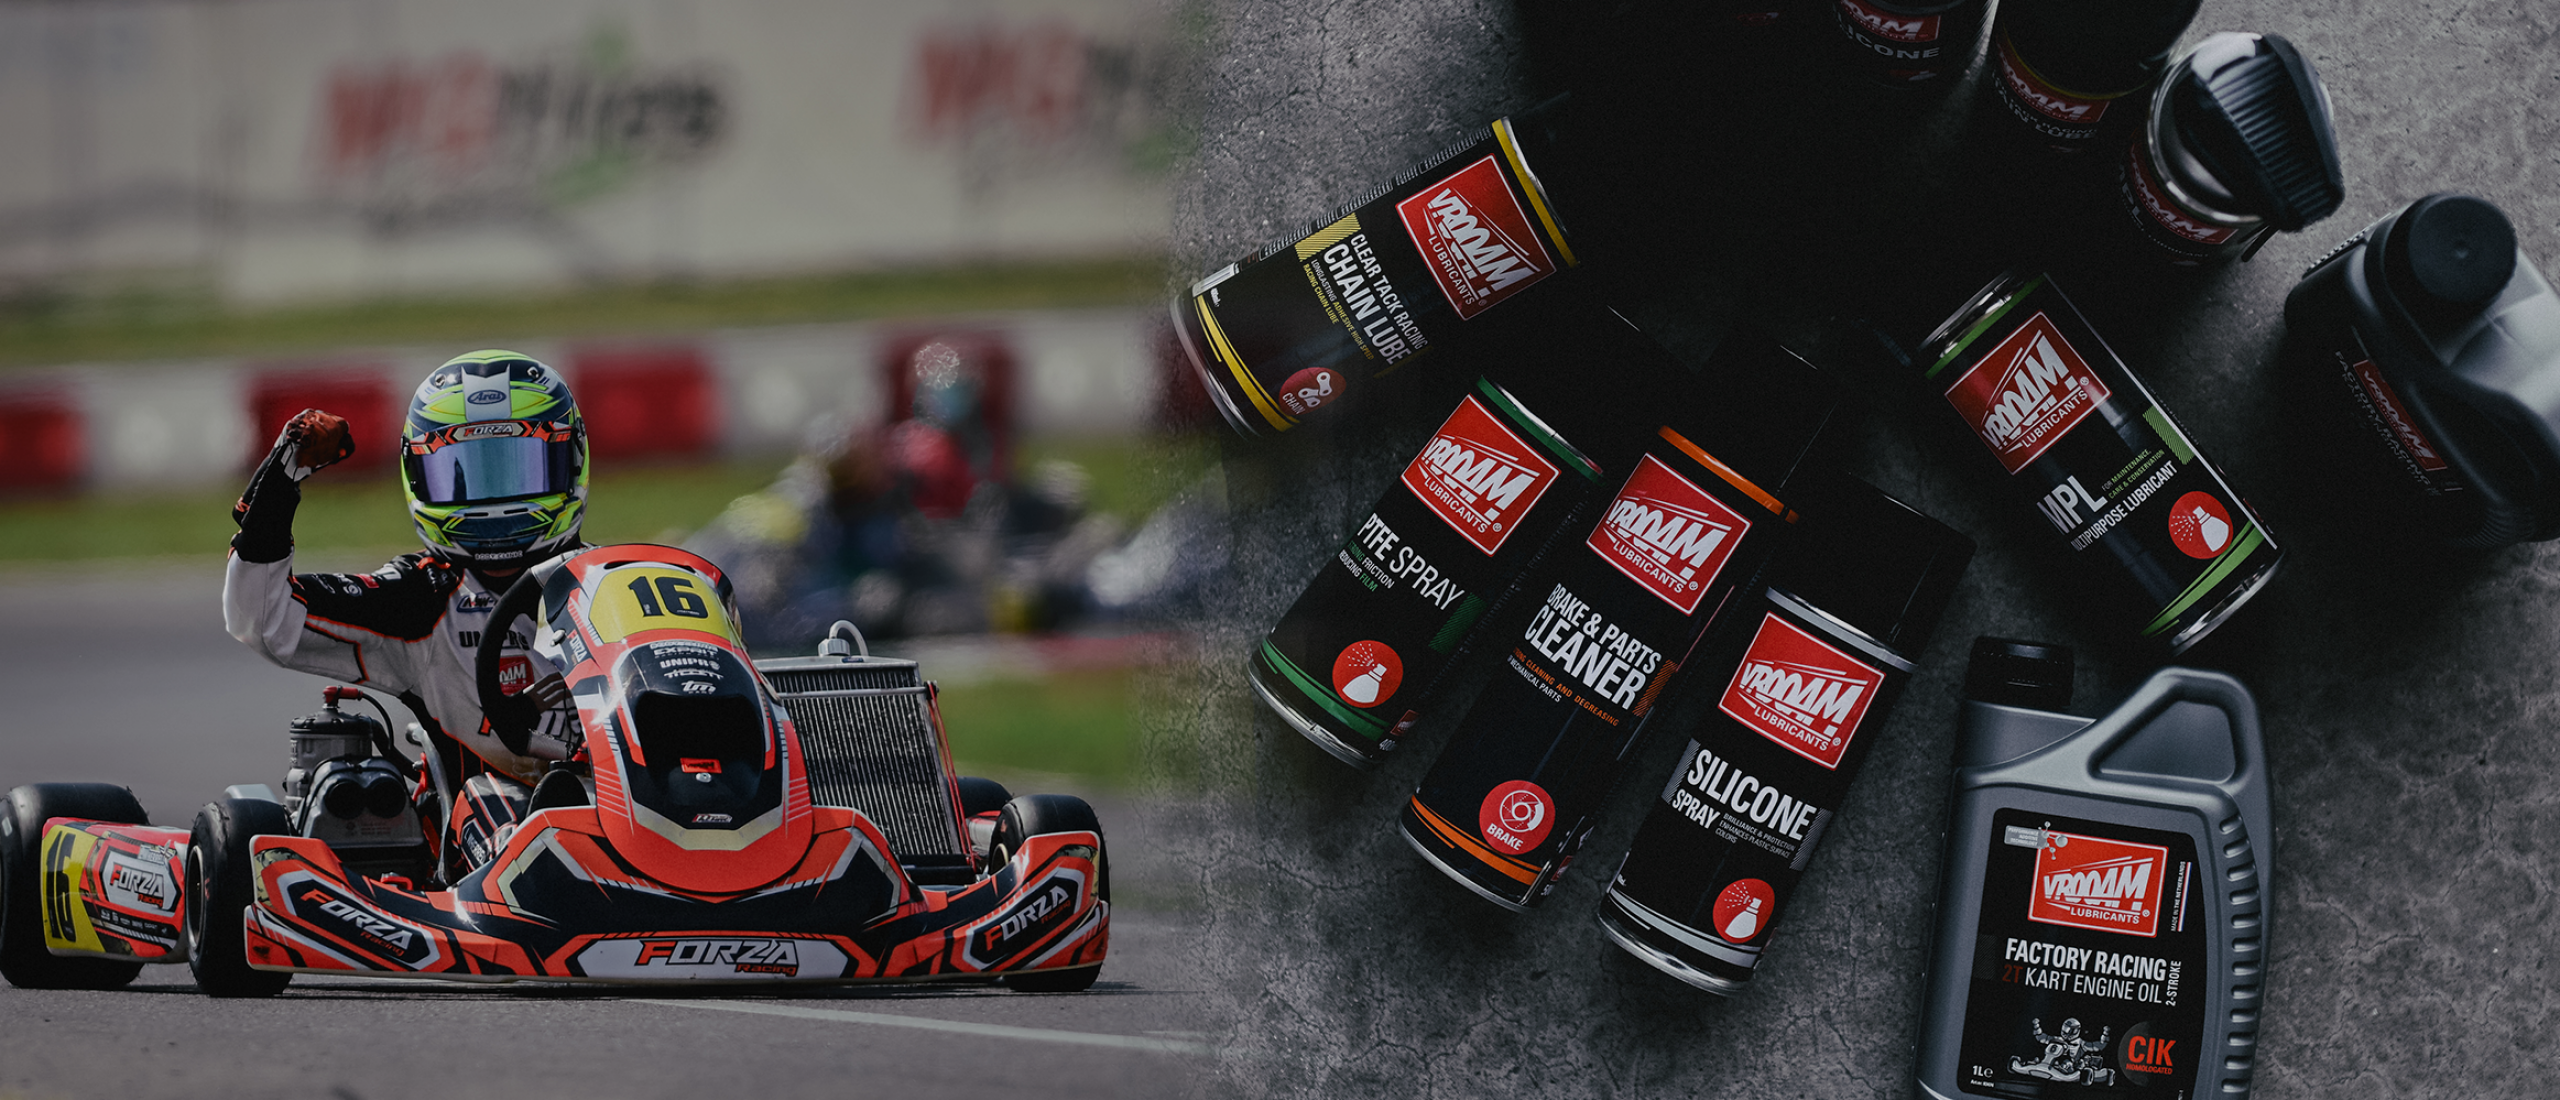 GEAR UP FOR VICTORY WITH VROOAM LUBRICANTS